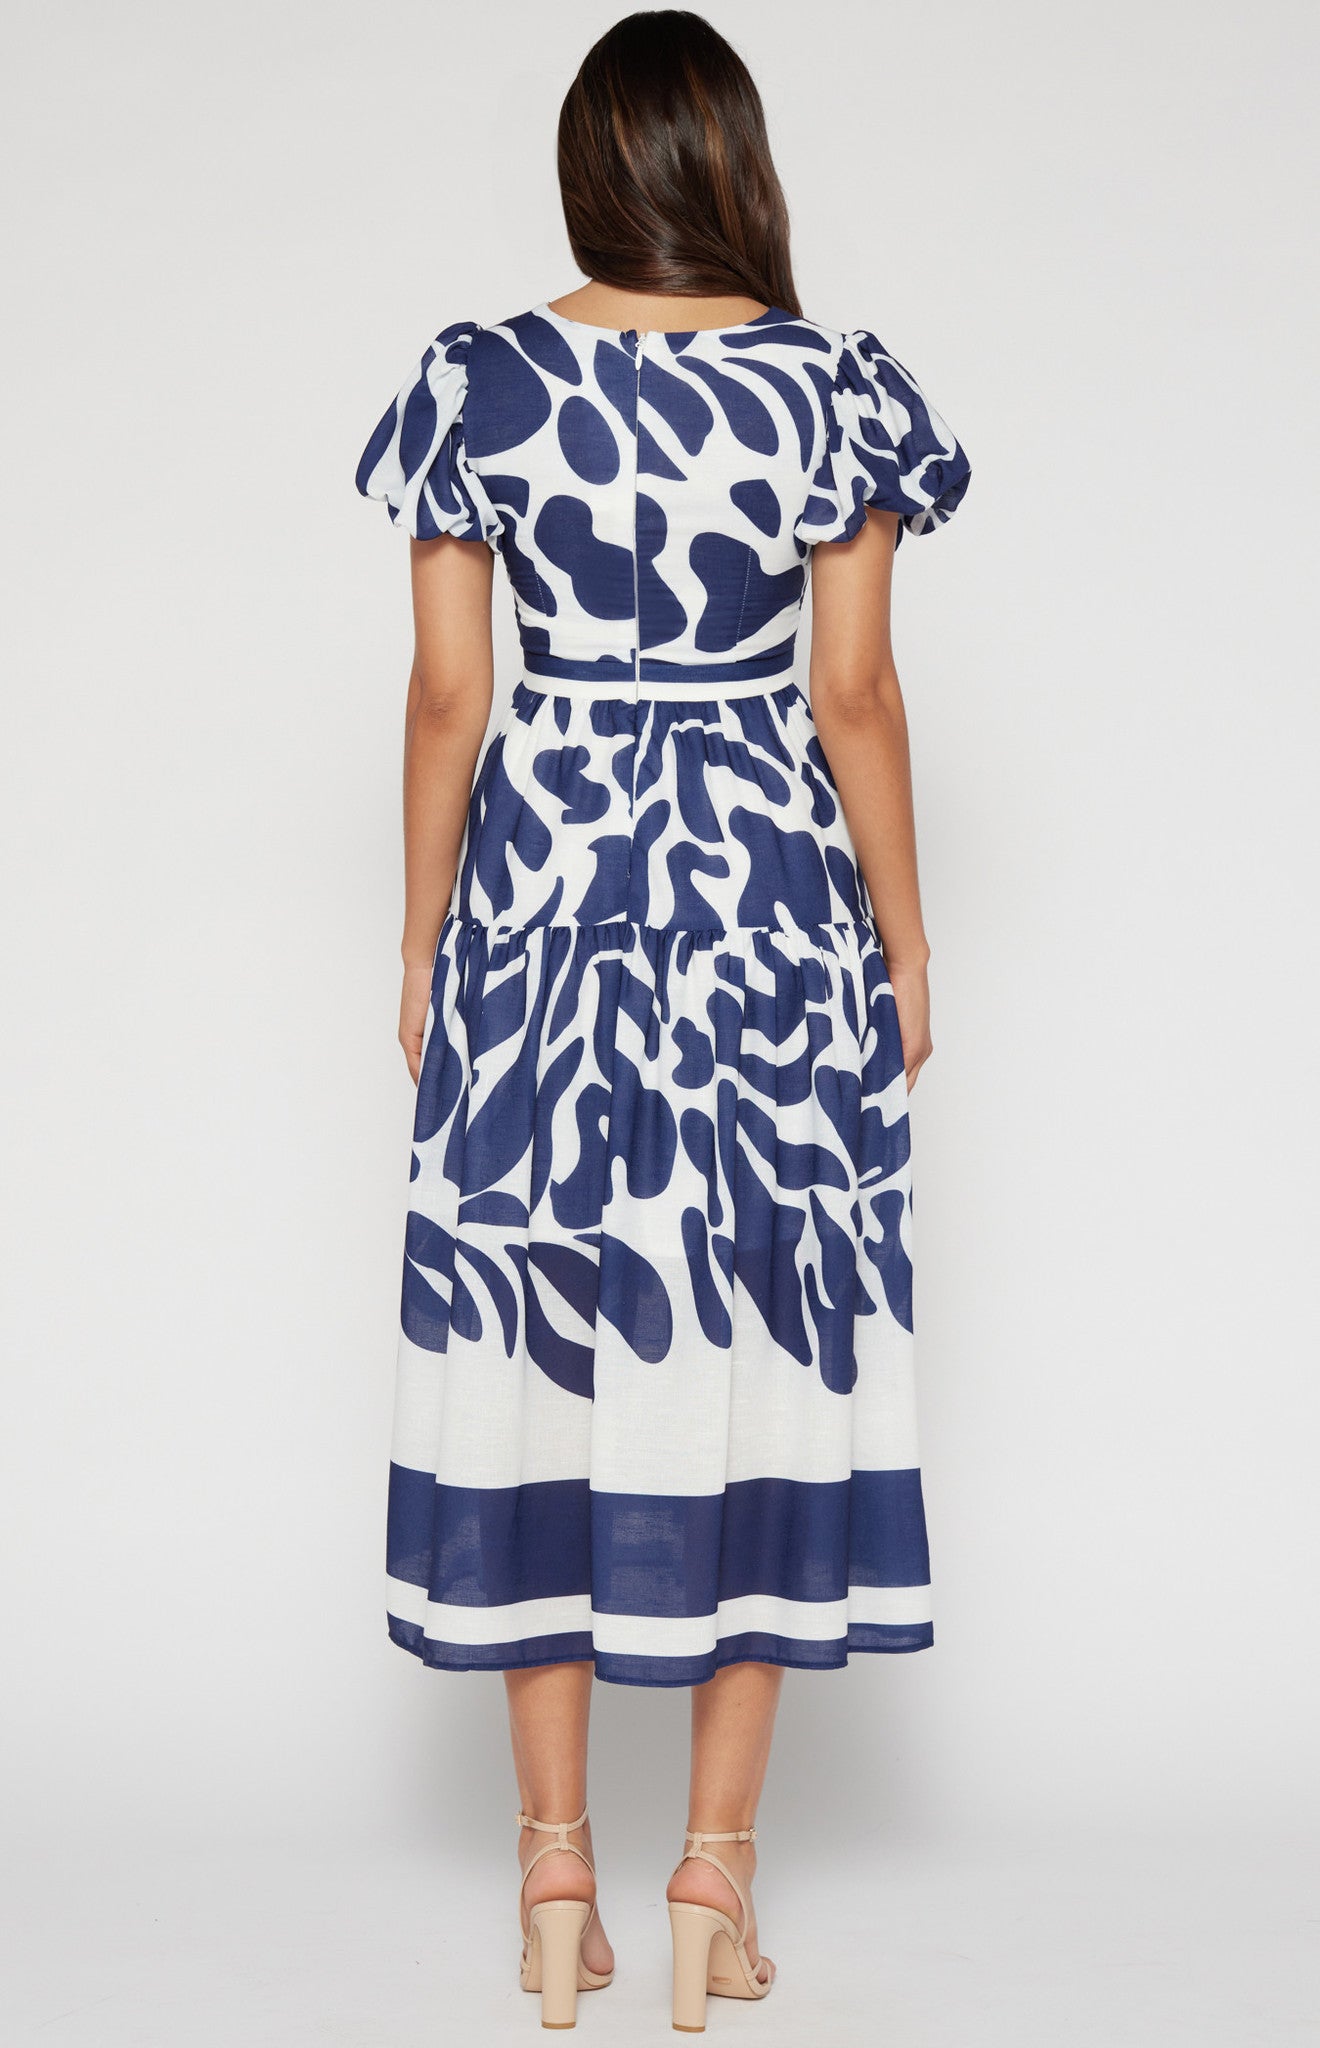 Navy blue midi-length dress, fitted at the bodice for a flattering silhouette